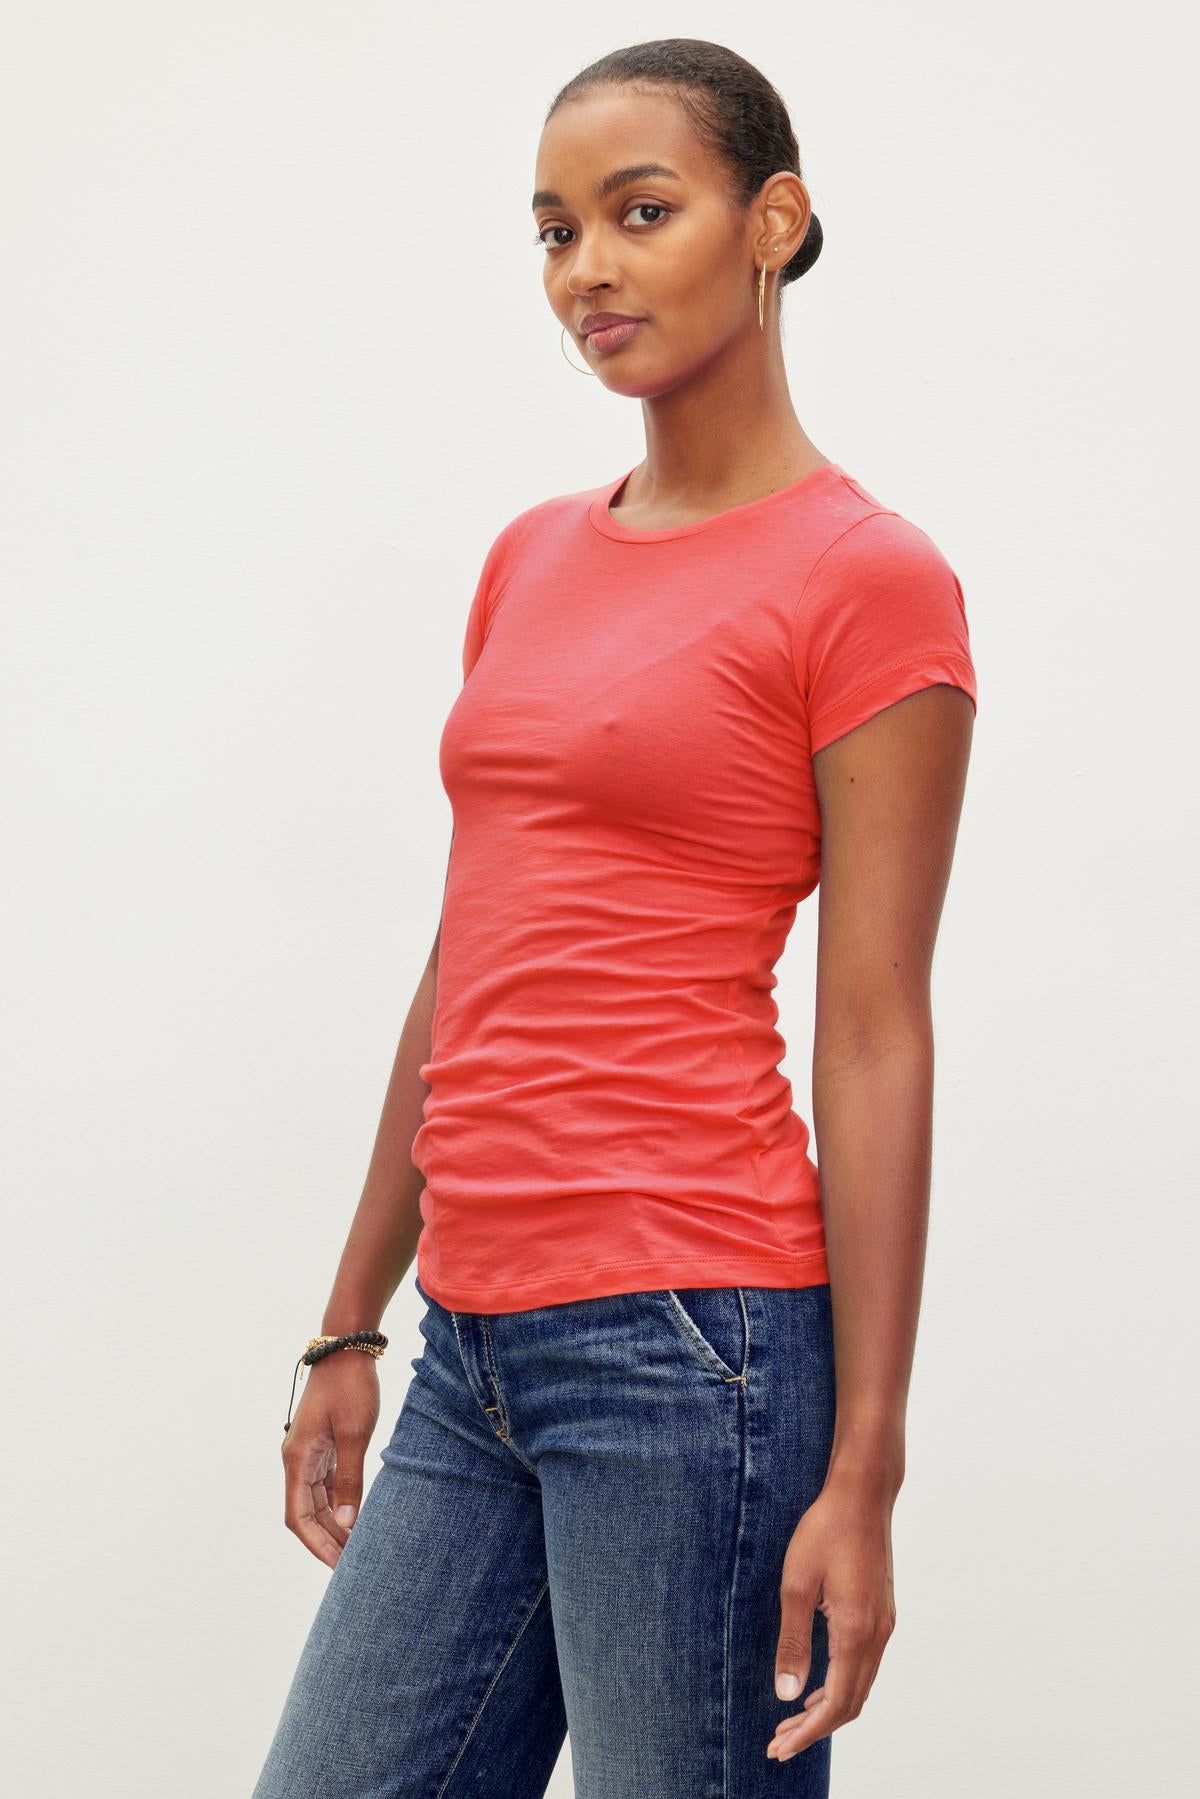 Woman posing in a Velvet by Graham & Spencer Jemma Gauzy Whisper Fitted Crew Neck Tee and blue jeans against a white background.-36533000208577